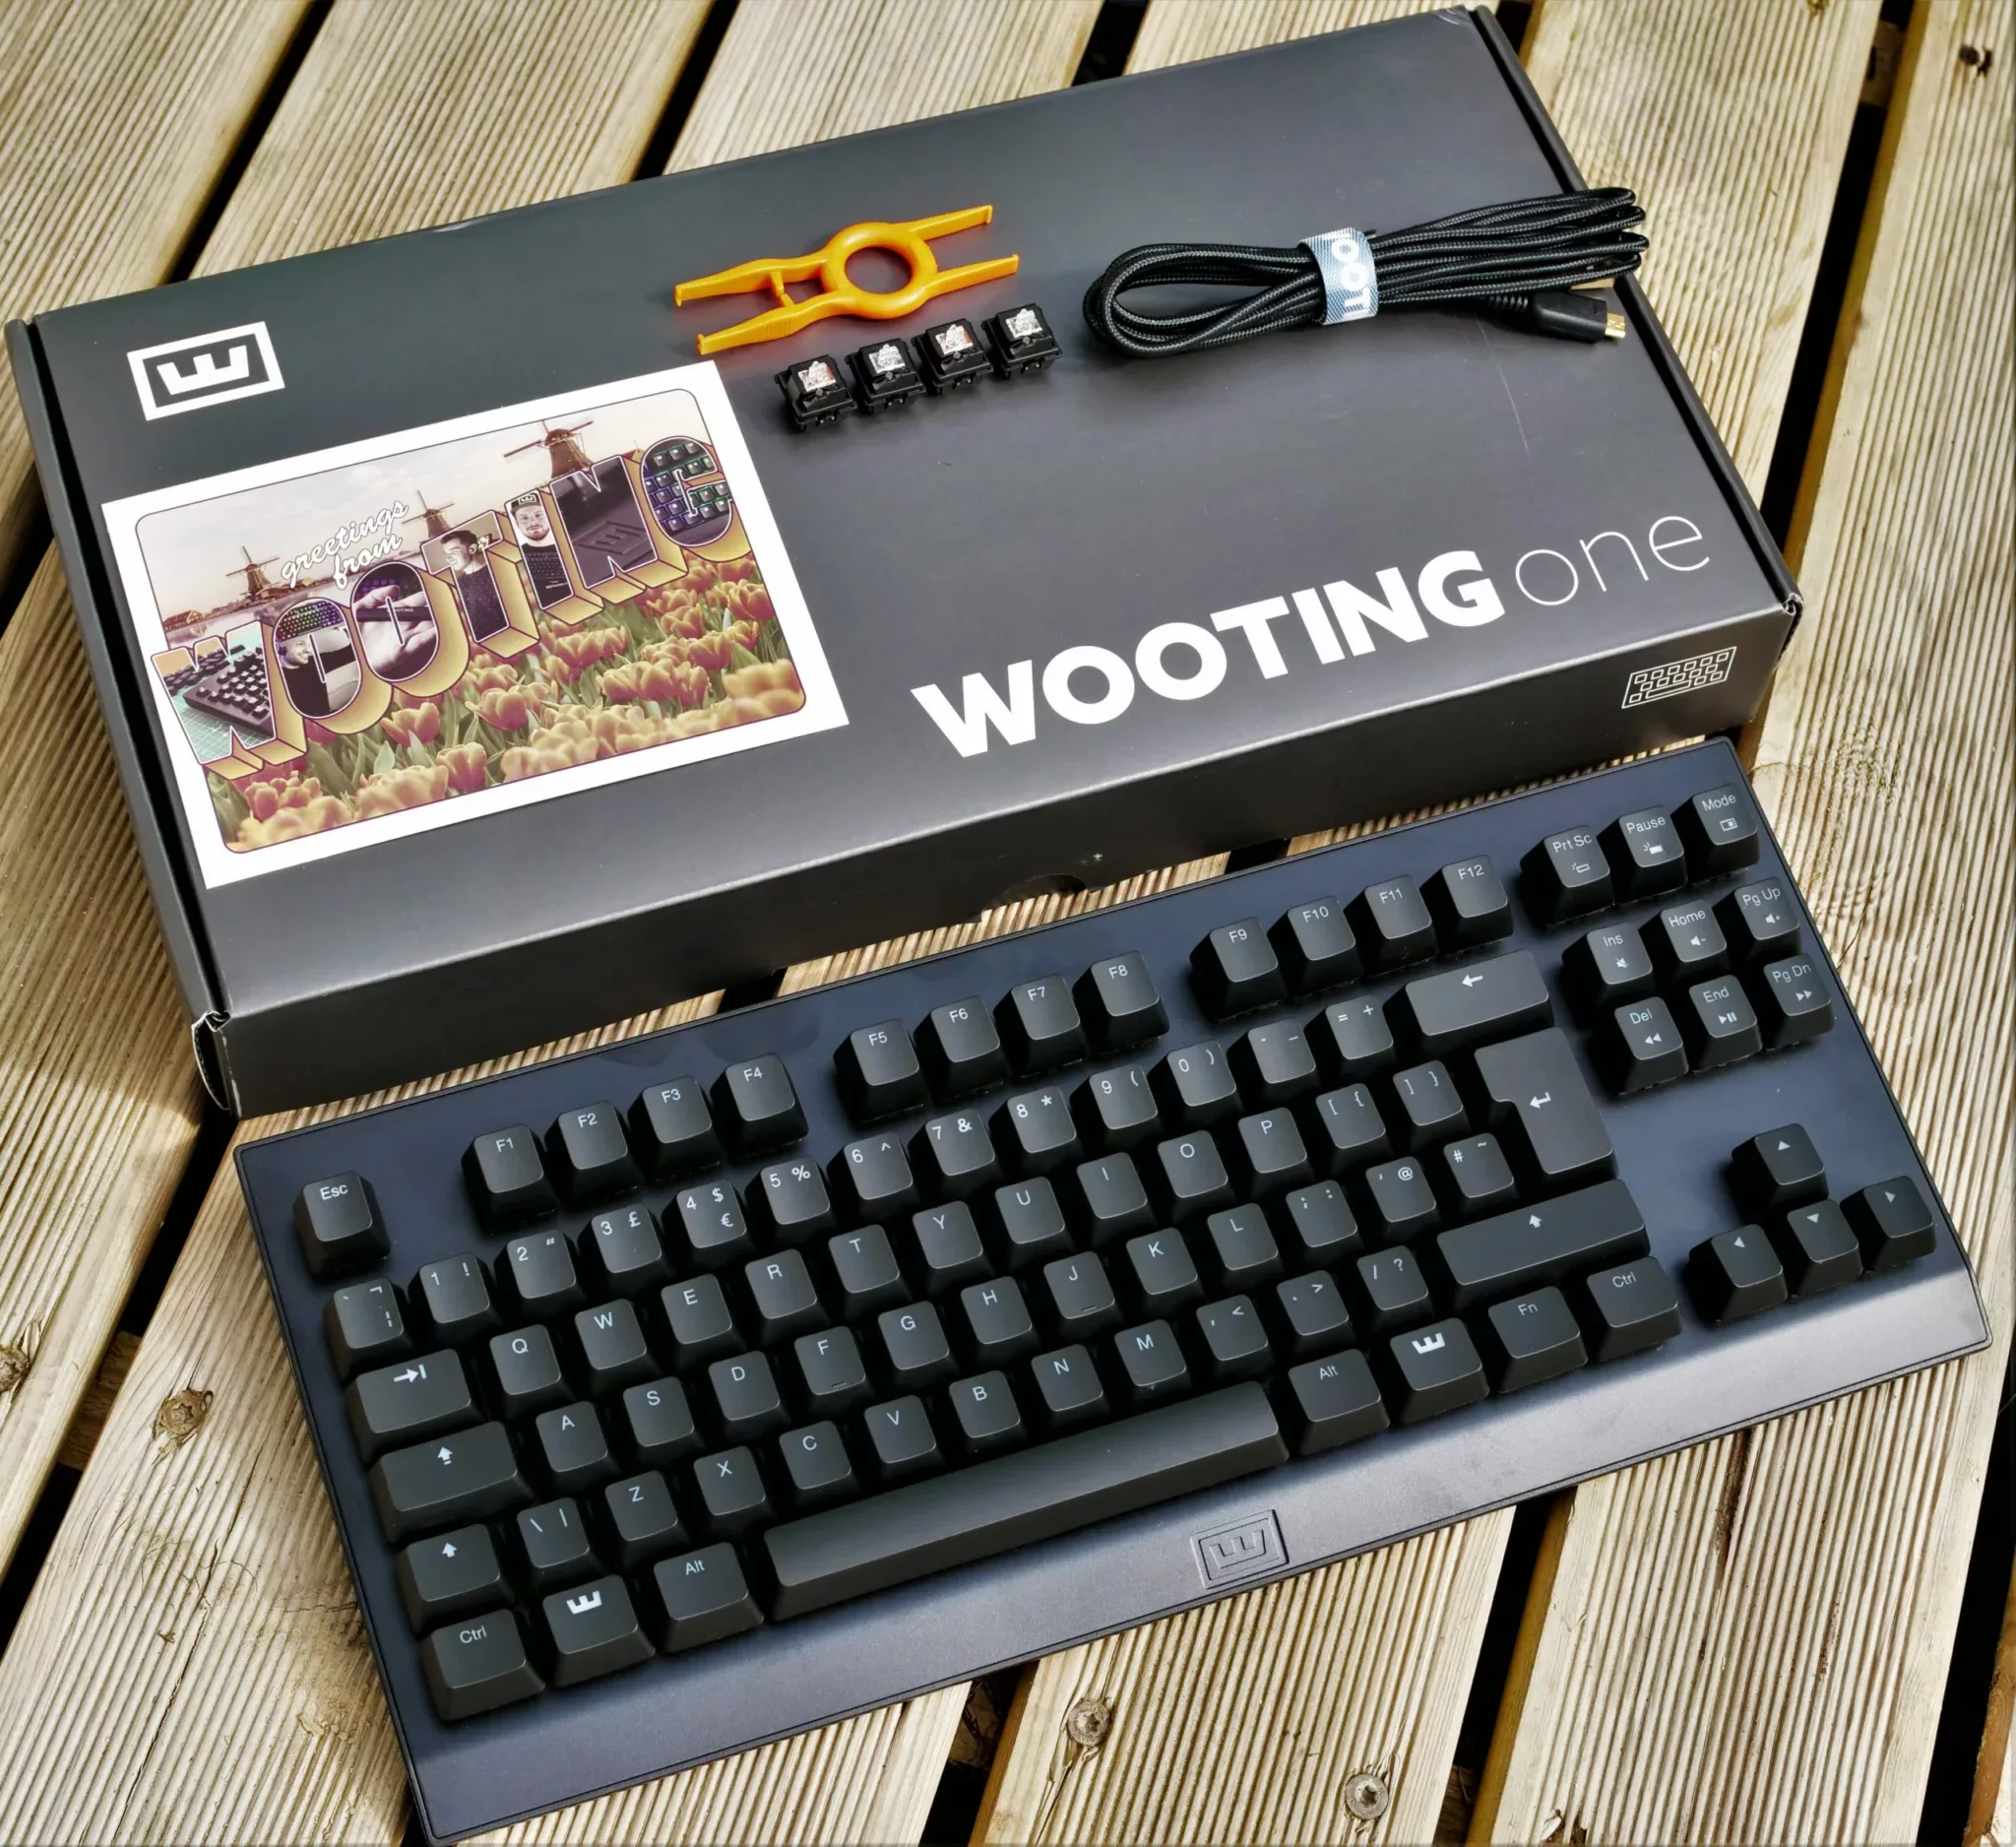 boite wooting one ouverte avec clavier